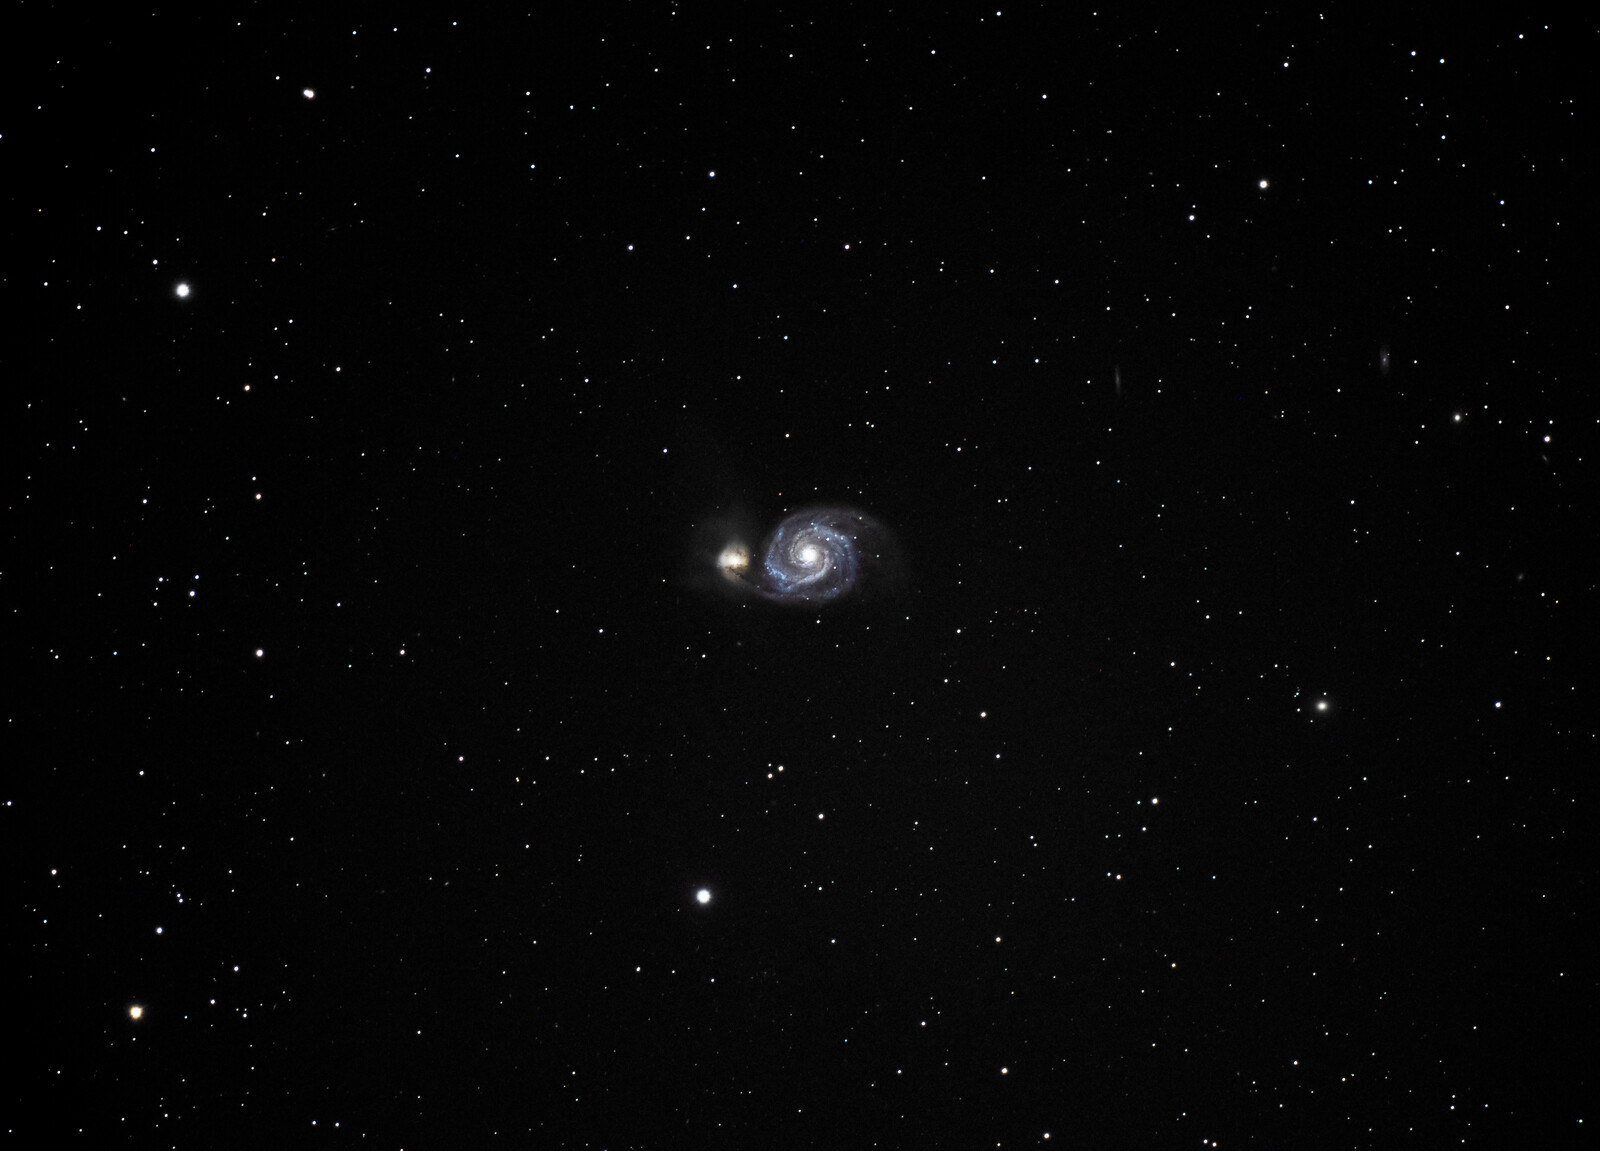 M51 from Jeff’s 5 inch refractor